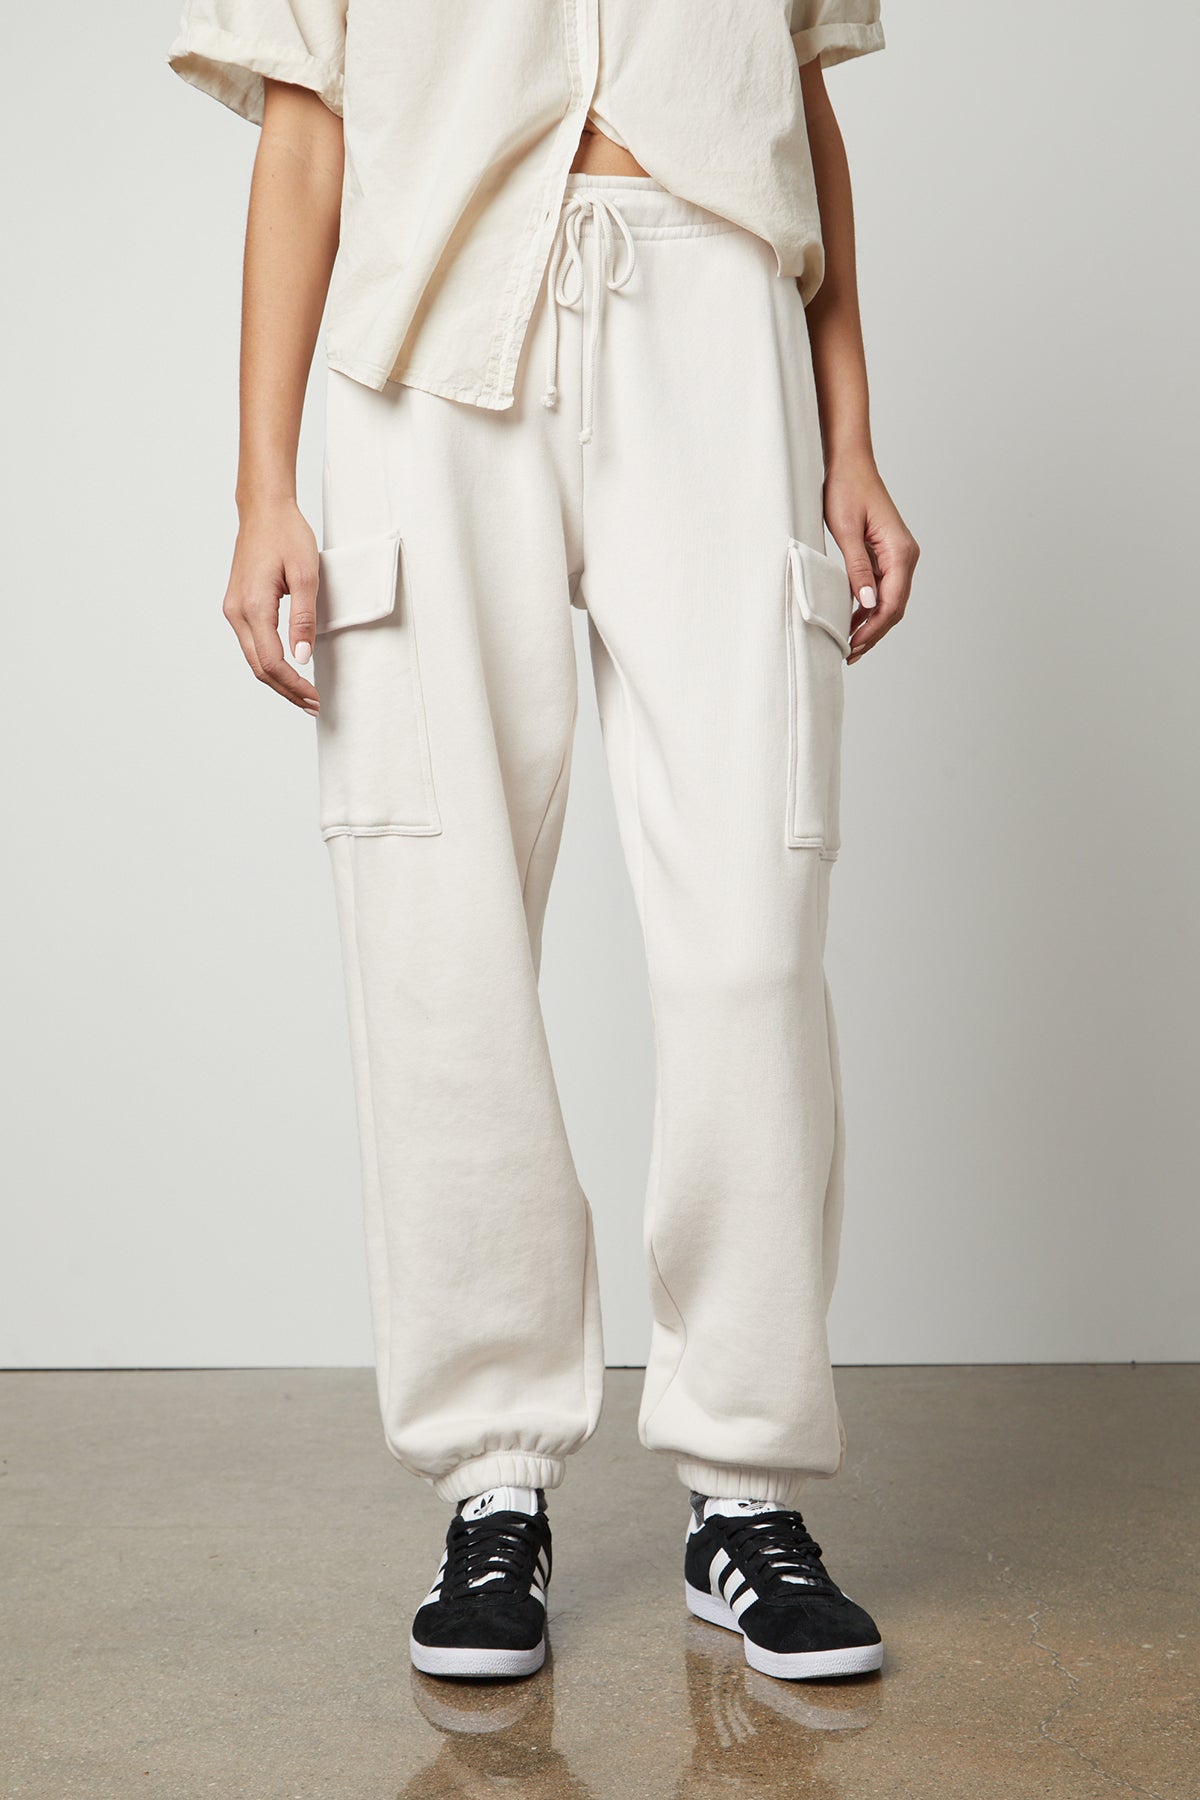 The model is wearing Velvet by Graham & Spencer's LUMI DRAWSTRING WAIST SWEATPANT and white sneakers.-26799843344577